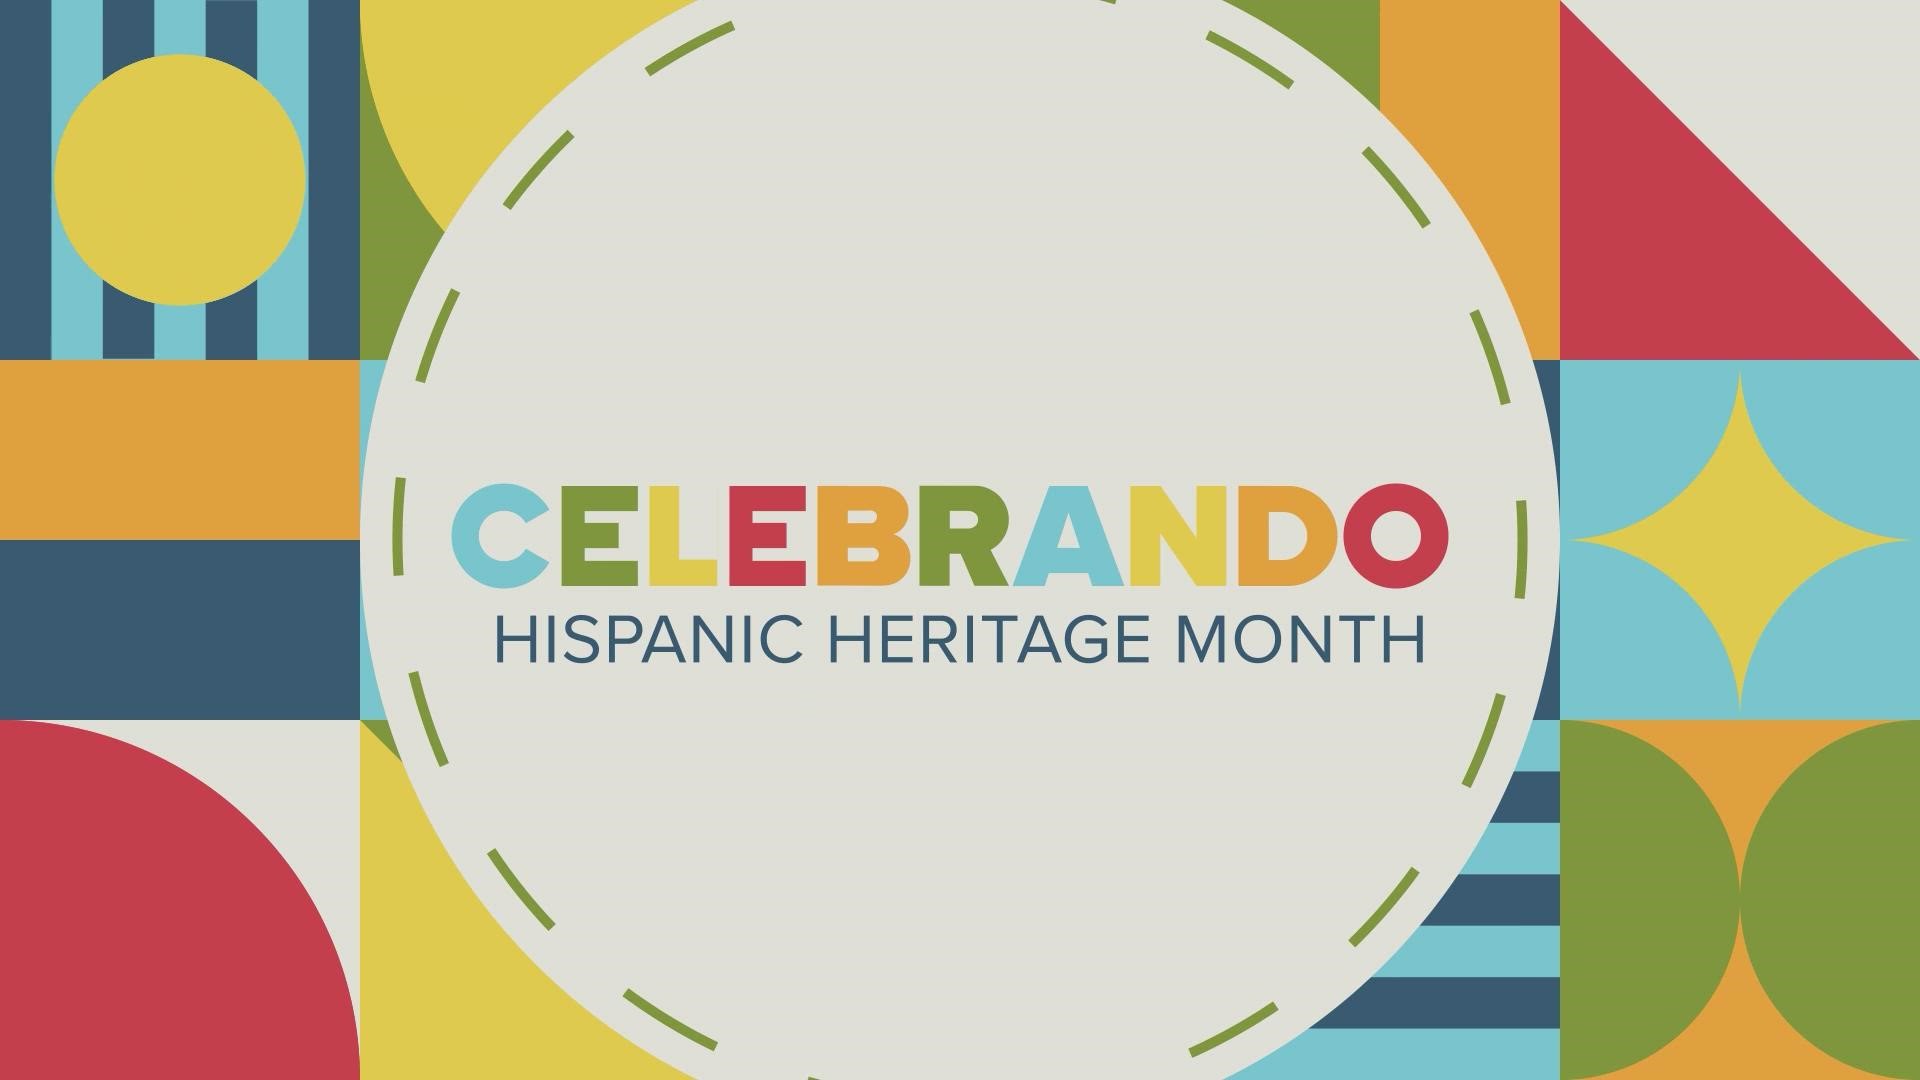 ABC10 celebrates Hispanic Heritage Month with a collection of stories highlighting the rich culture and traditions of one of California's most vibrant communities.